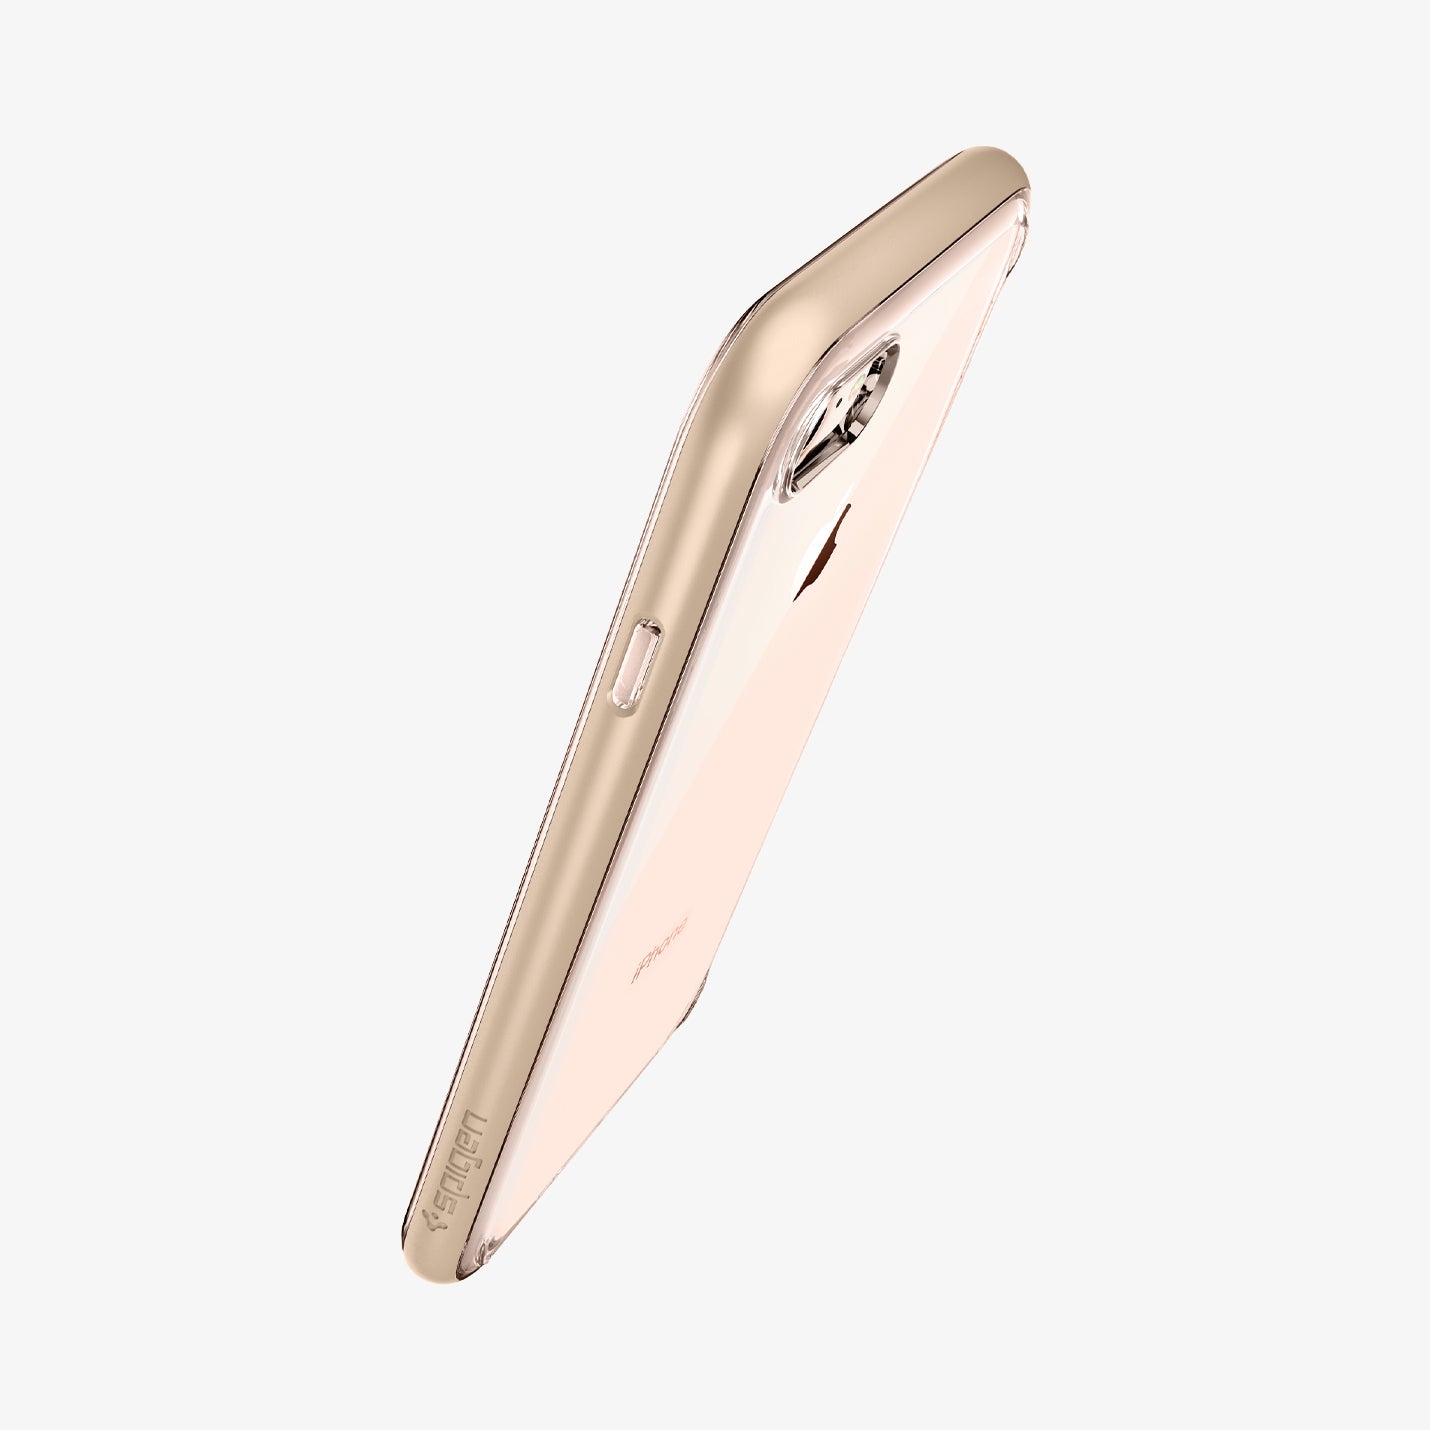 054CS22366 - iPhone 8 Series Neo Hybrid Crystal Case in champagne gold showing the side, top and partial back